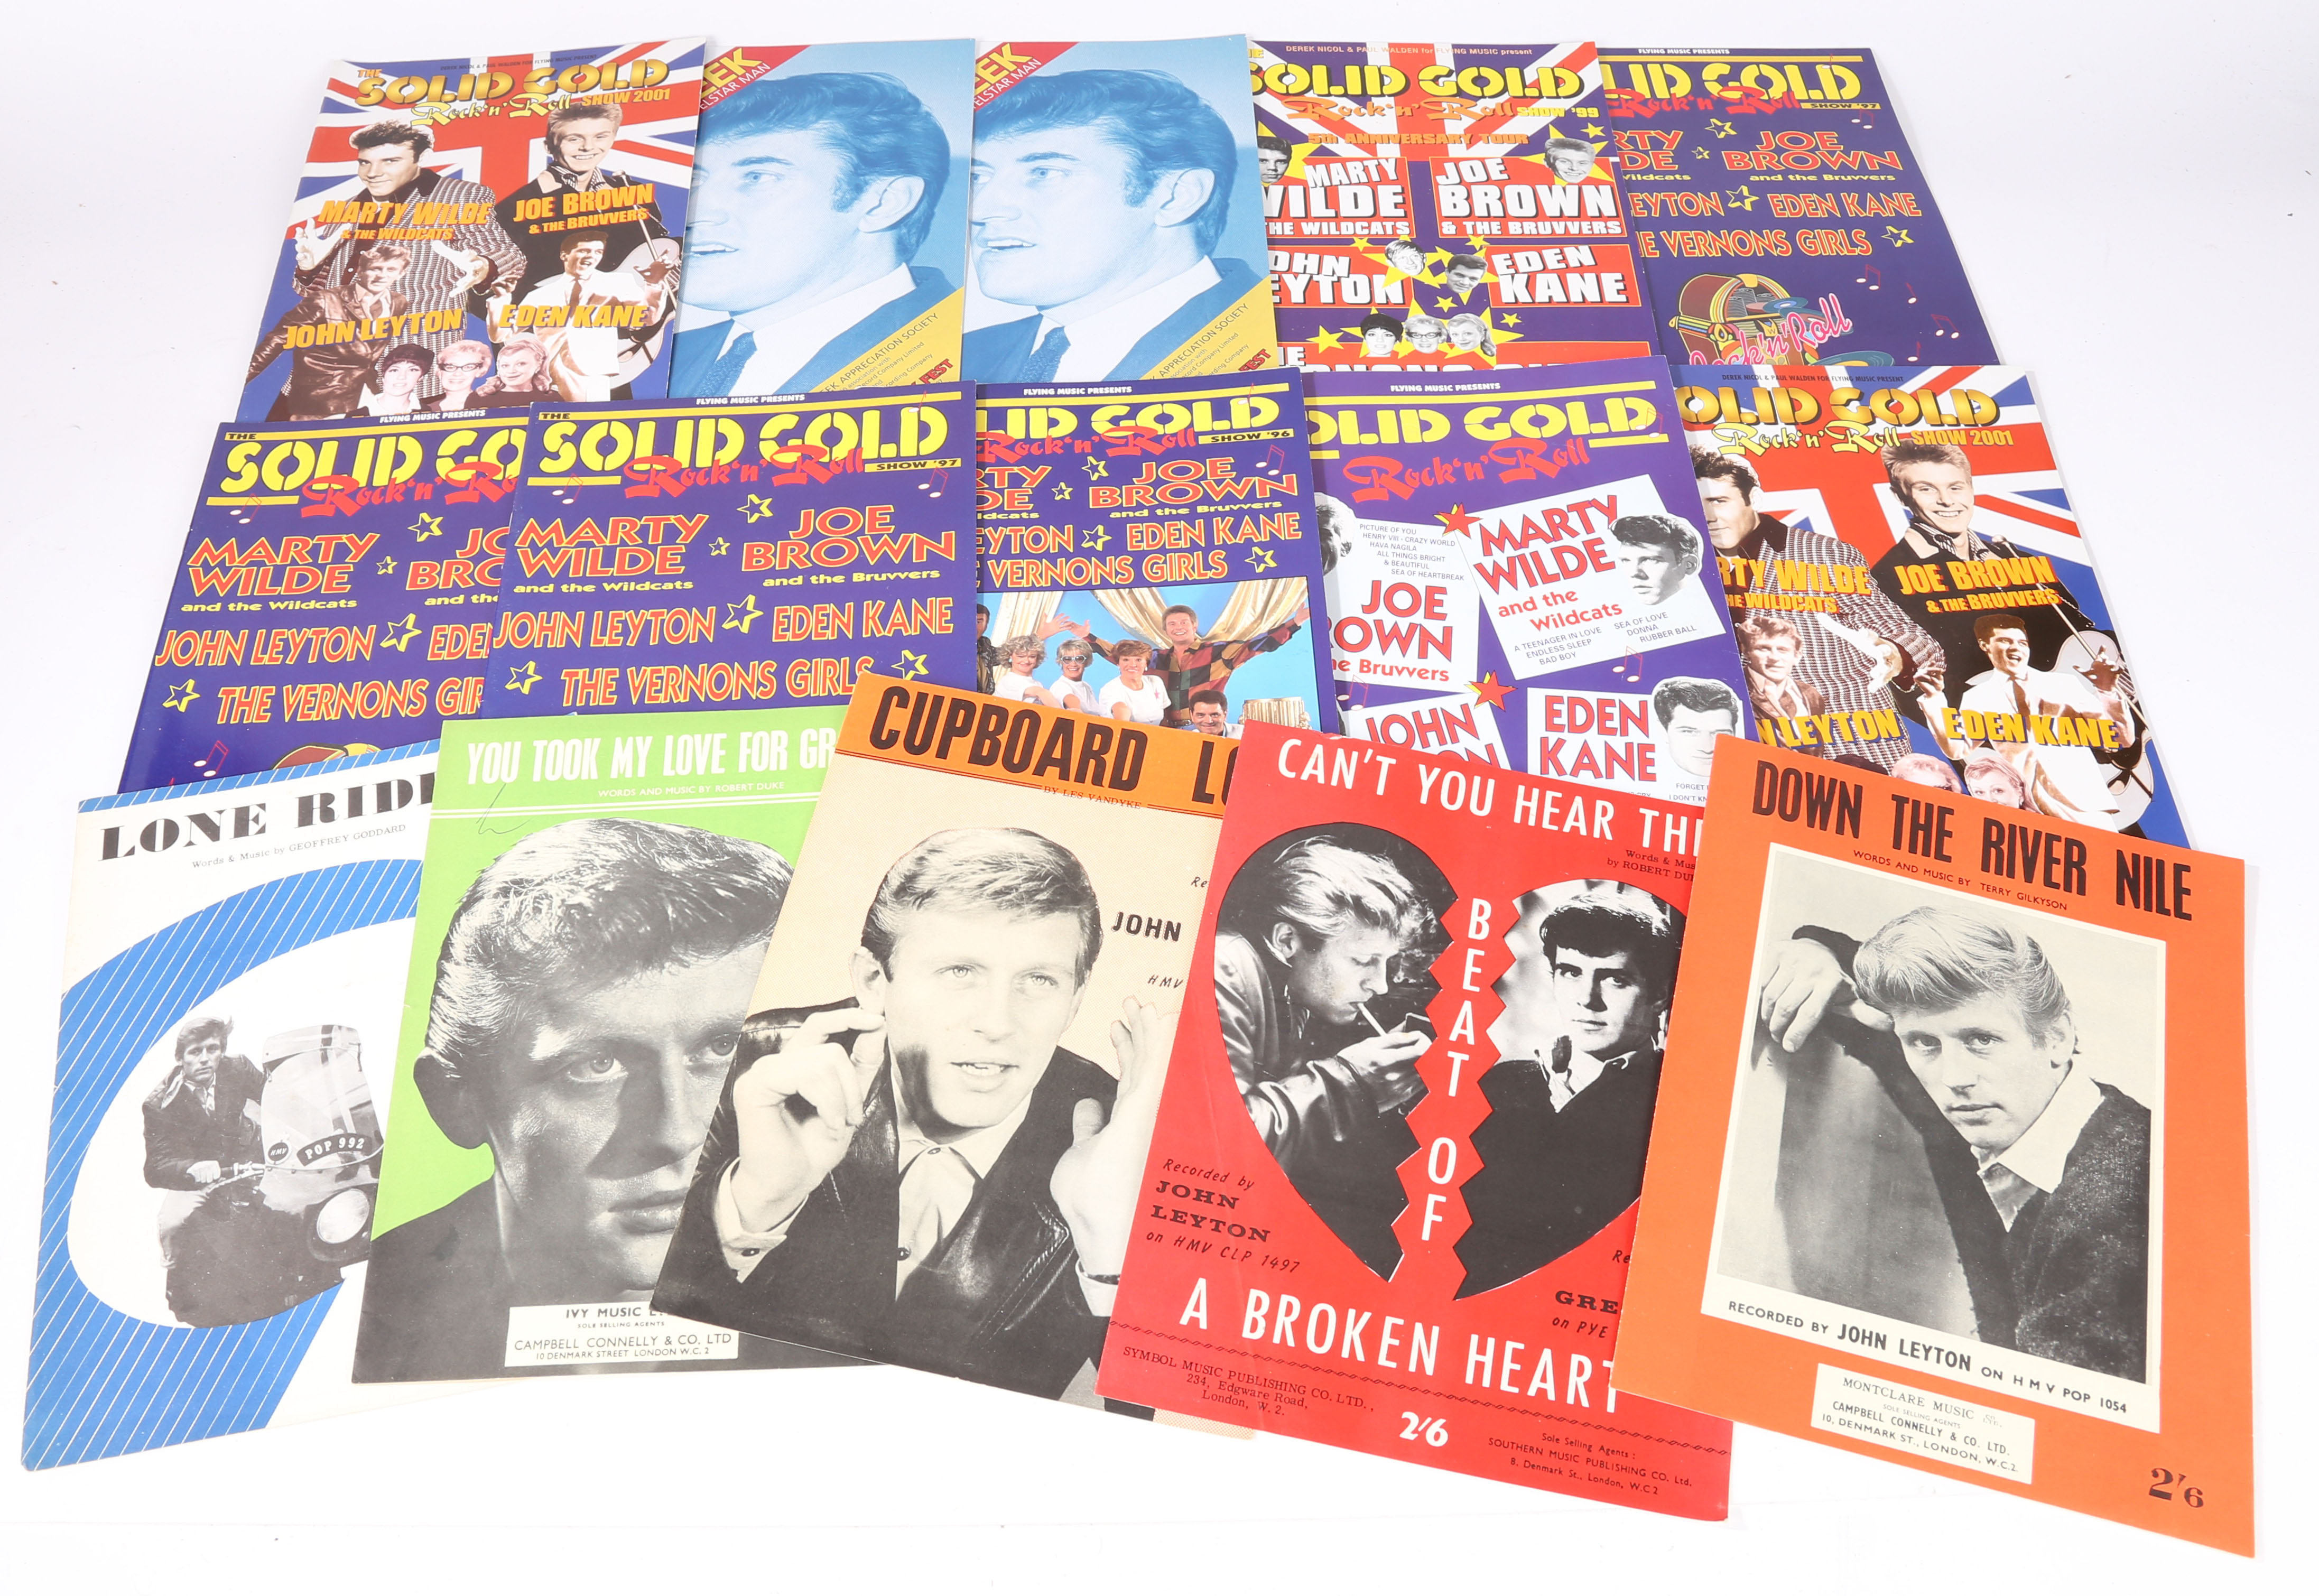 John Leyton. A collection of LPs, 45s, DVDs, and memorabilia relating to the music career of John - Image 10 of 32